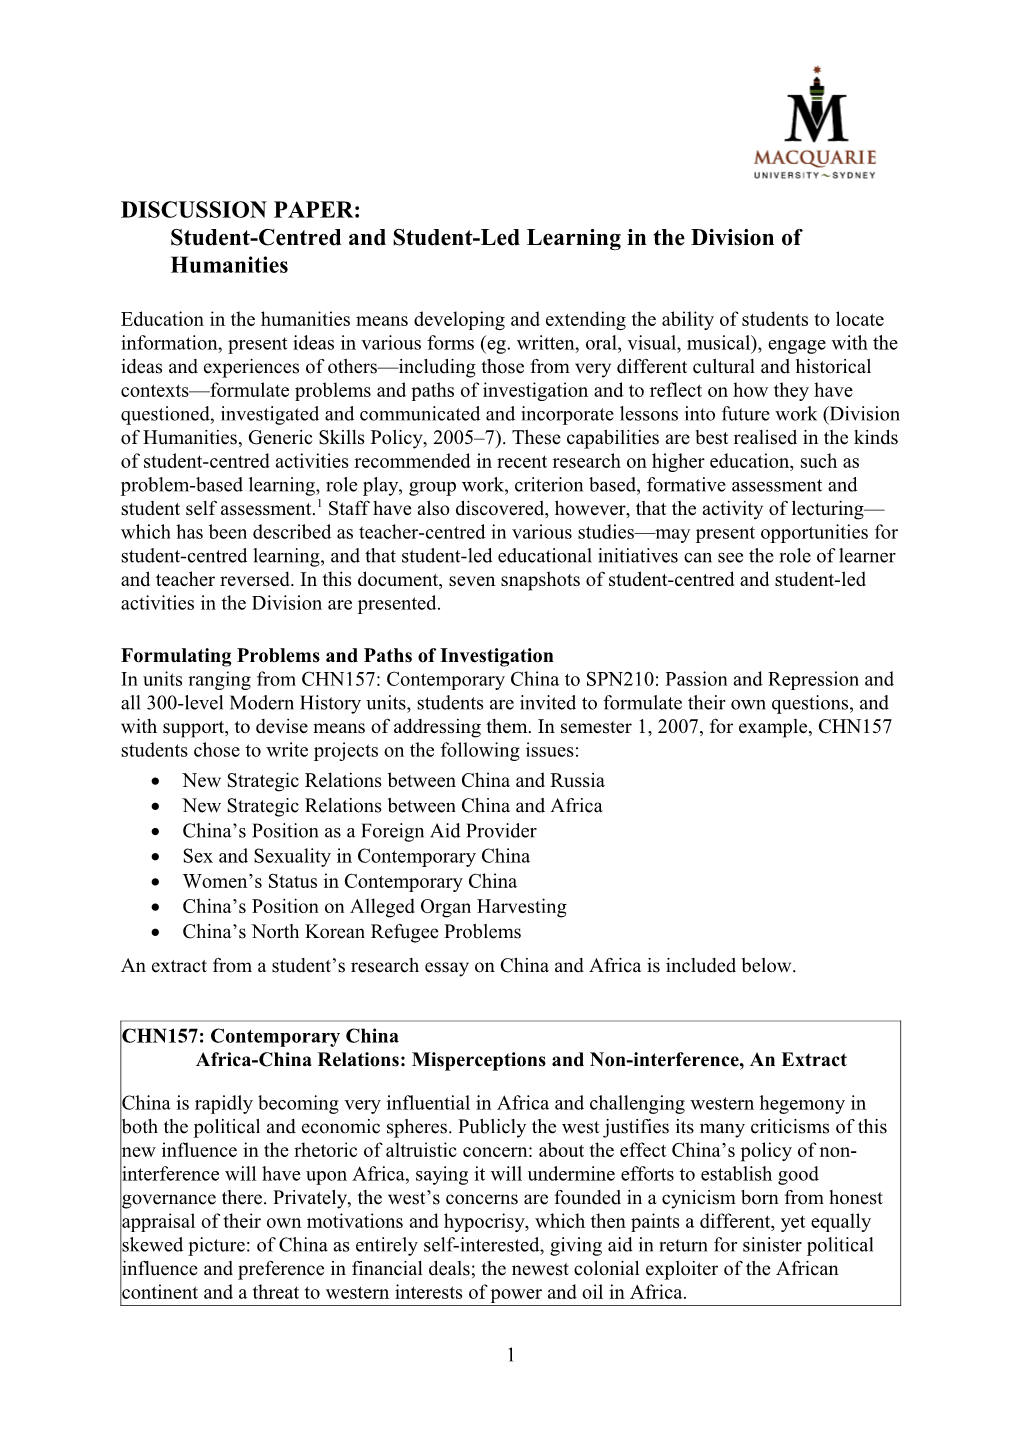 Student-Centred and Student-Led Learning in the Division of Humanities